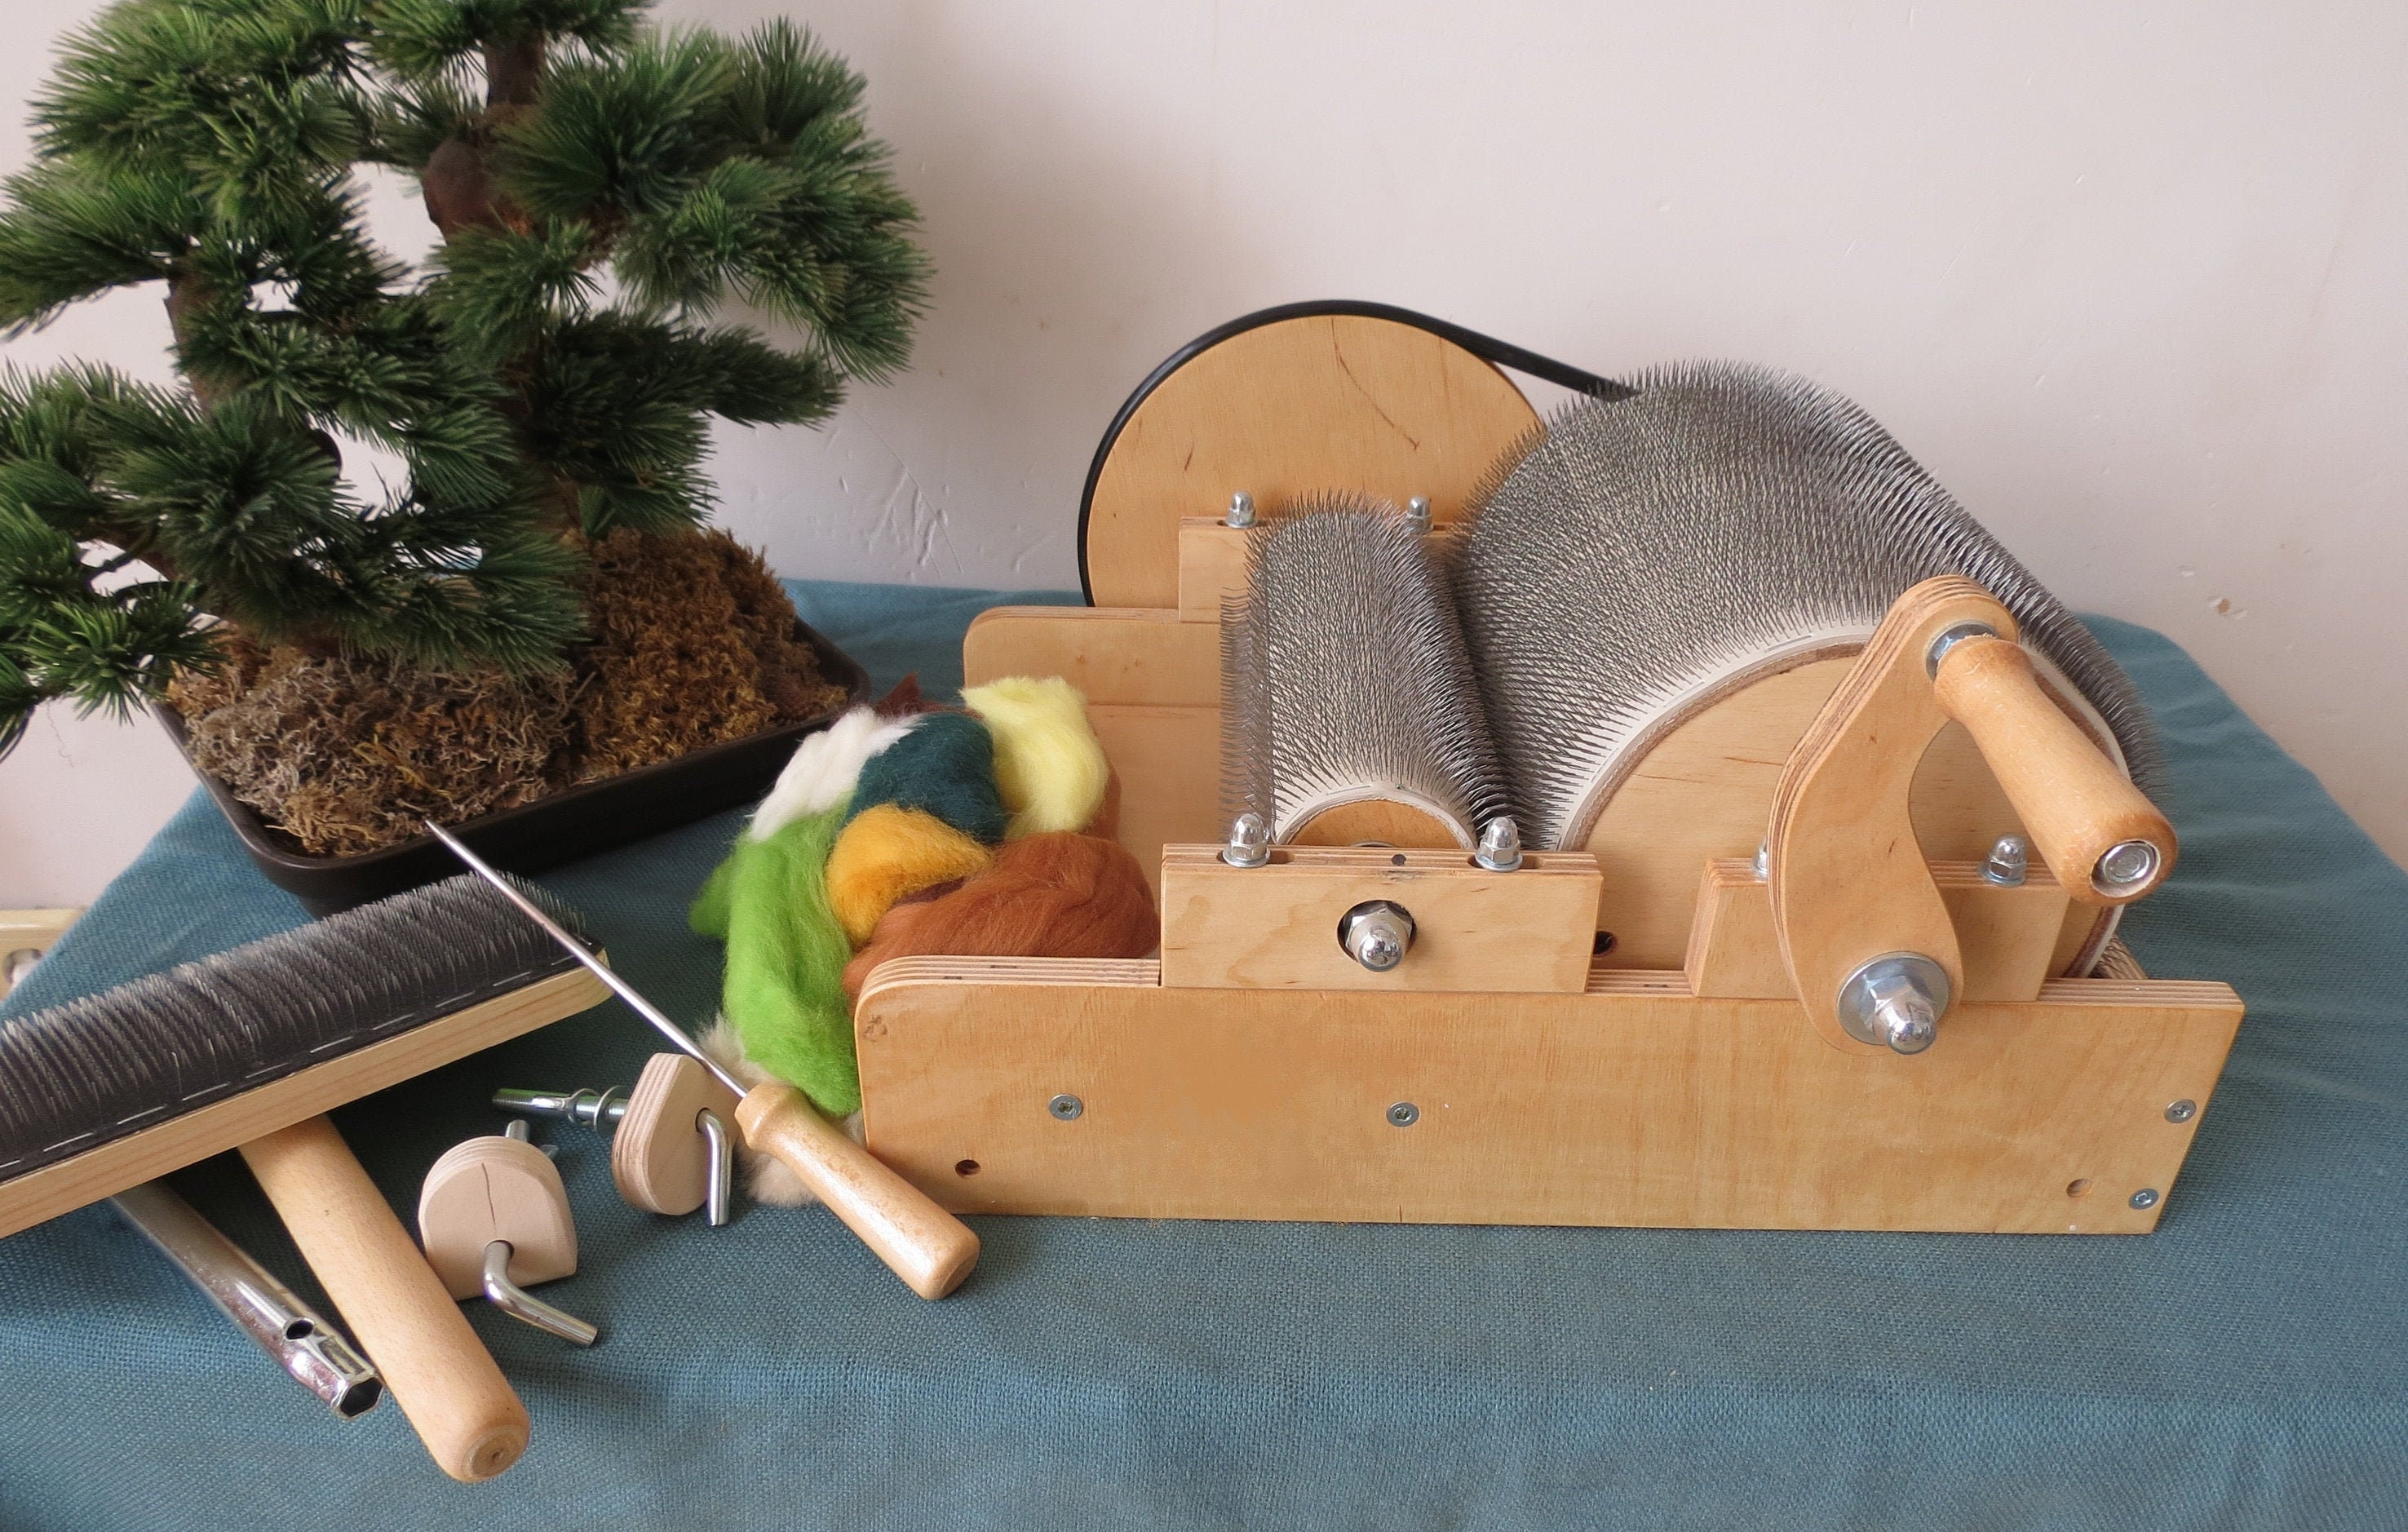 Wooden Carders (2 pcs) Hand Carders ,wool carder Felting Kit 72 TPI Strauch